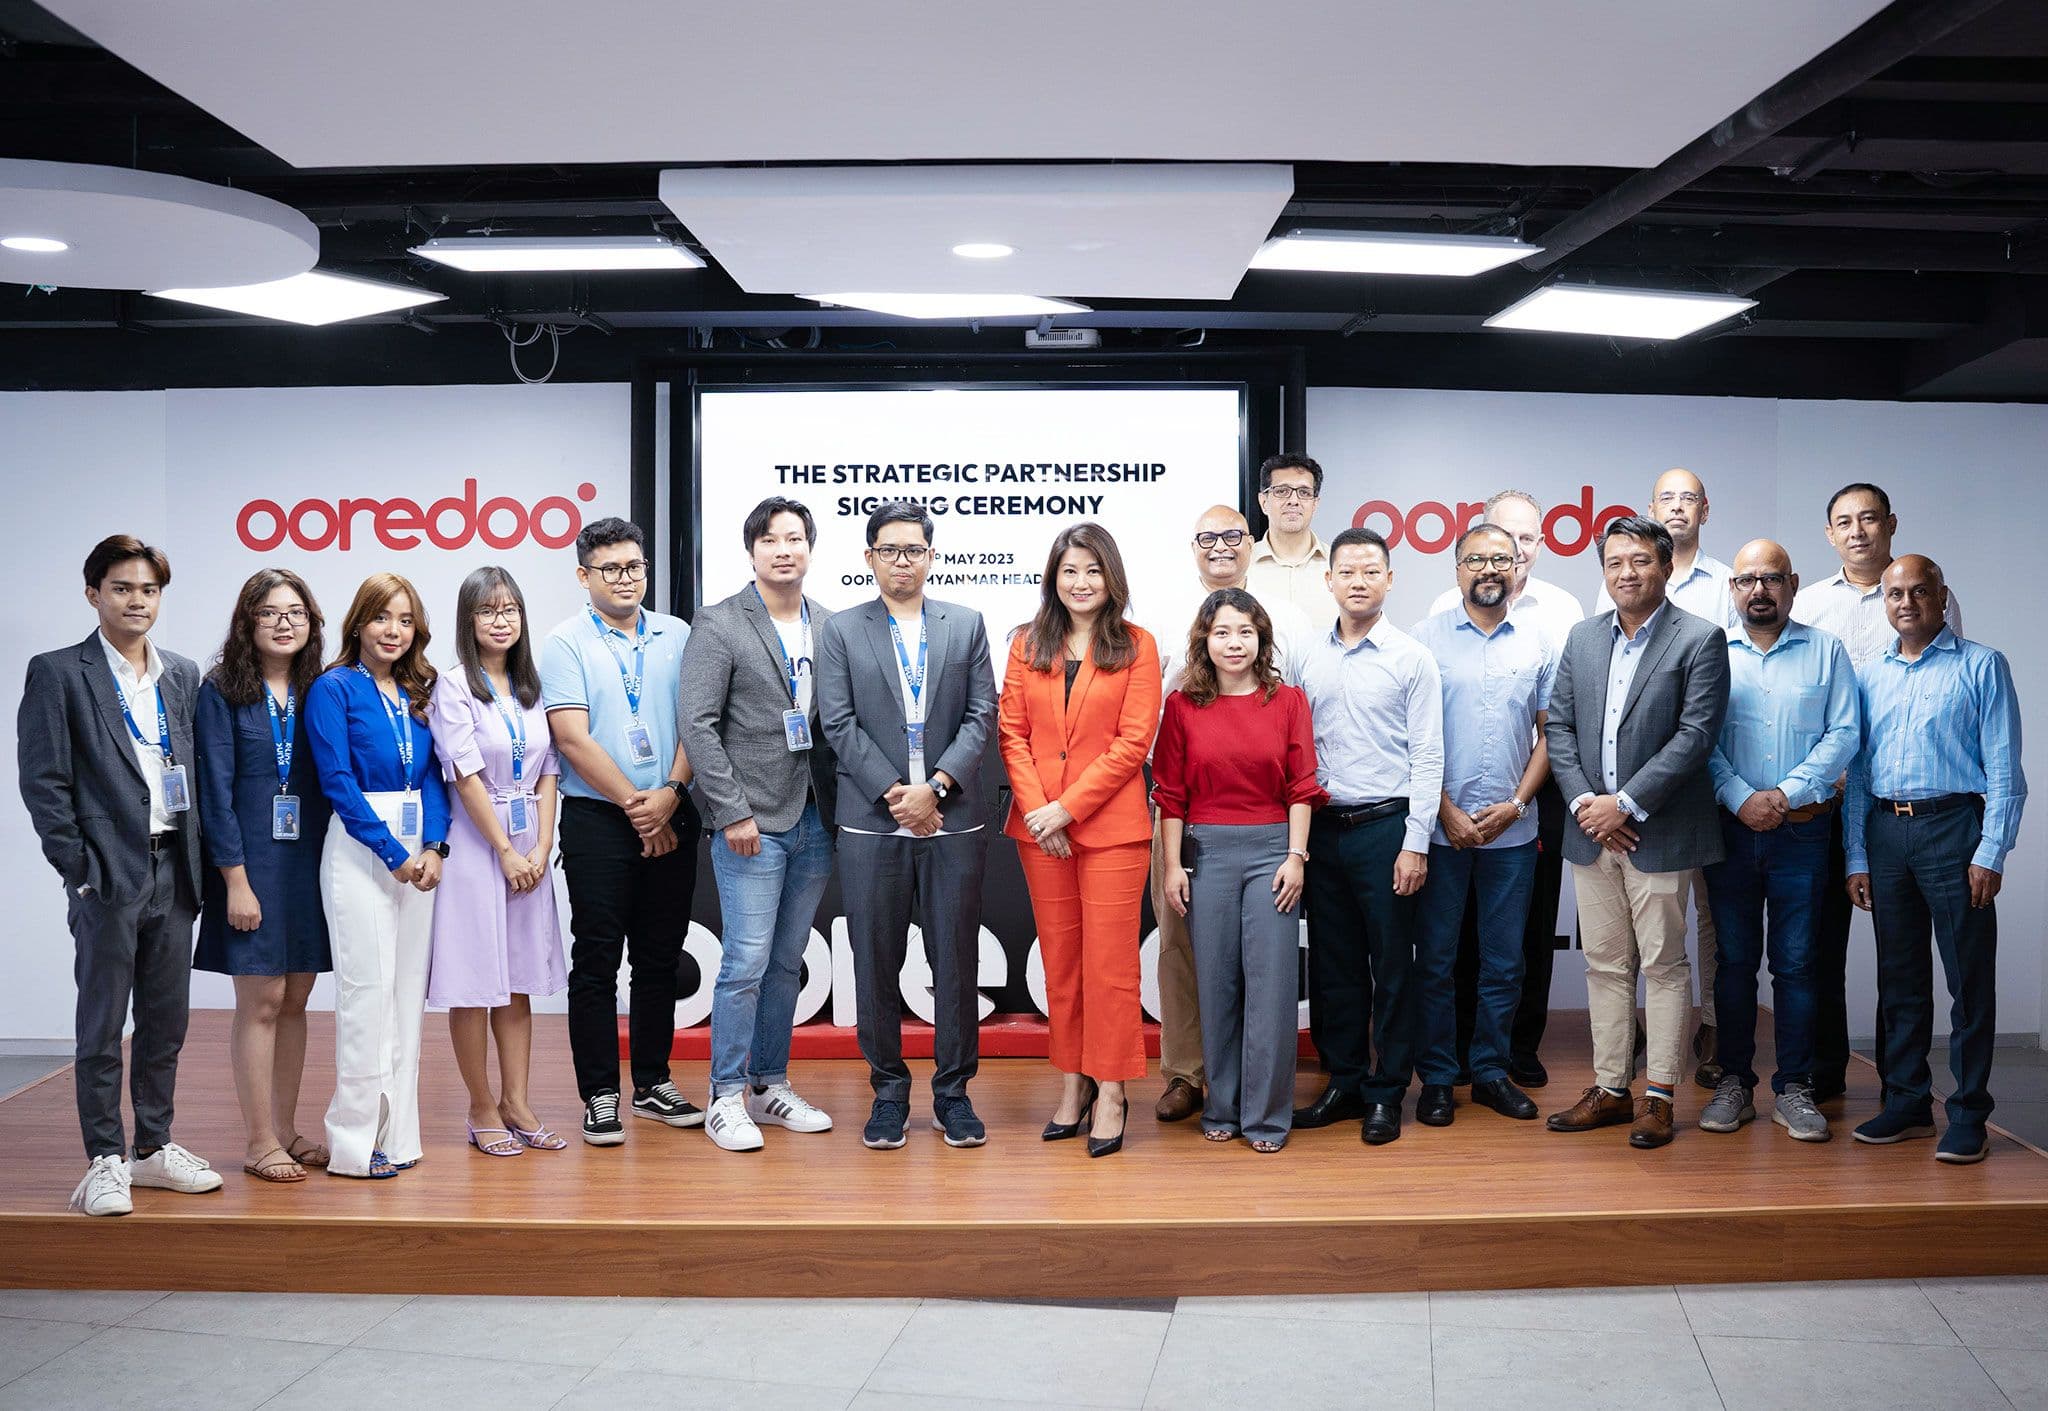 klink.cloud and Ooredoo Business announce strategic partnership to offer omnichannel contact center solutions for businesses across Southeast Asia